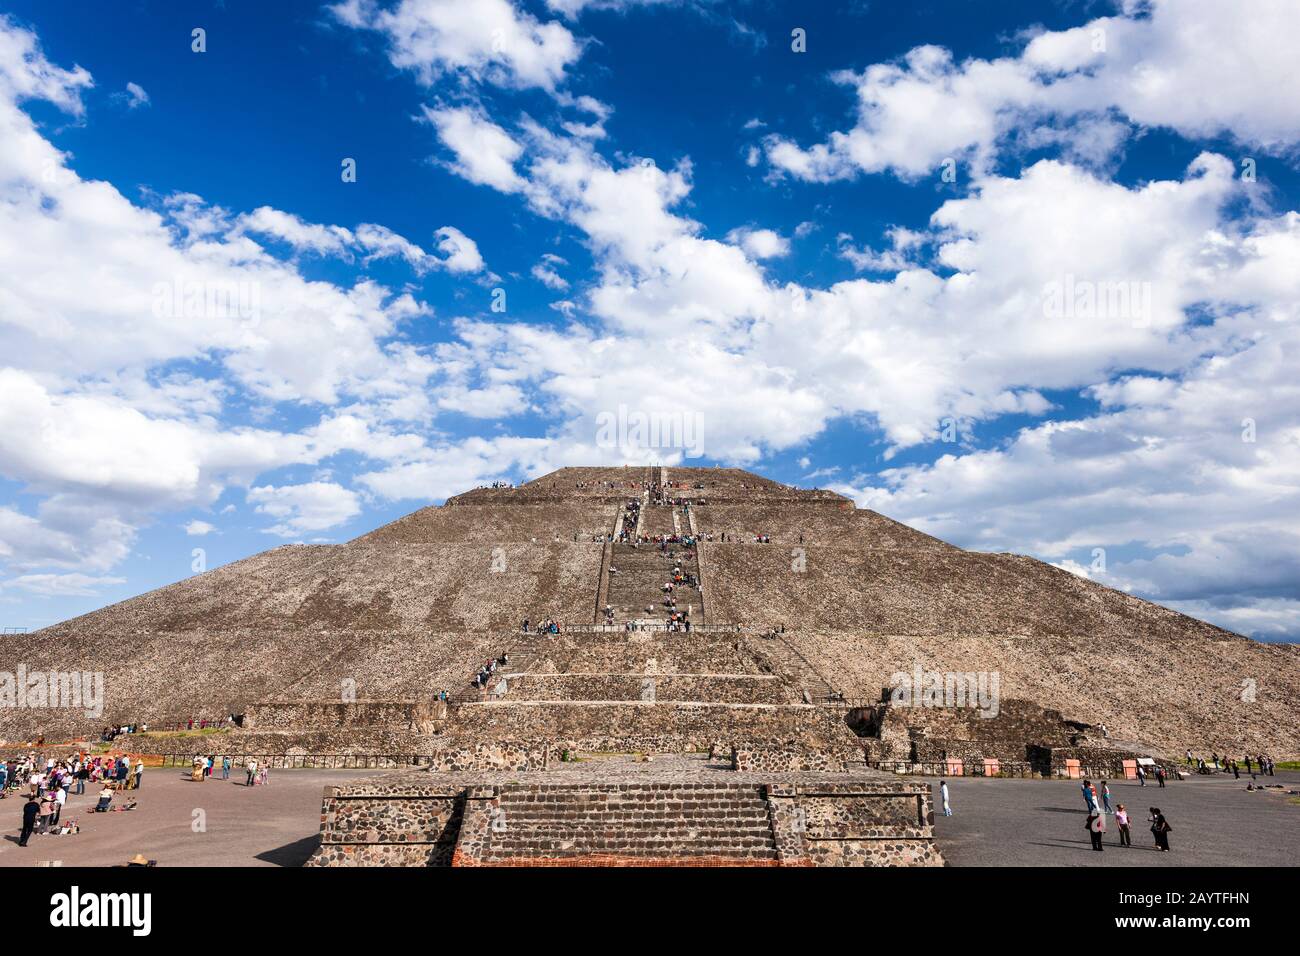 Pyramid of the Sun, Teotihuacan, suburb of Mexico City, Mexico, Central America Stock Photo